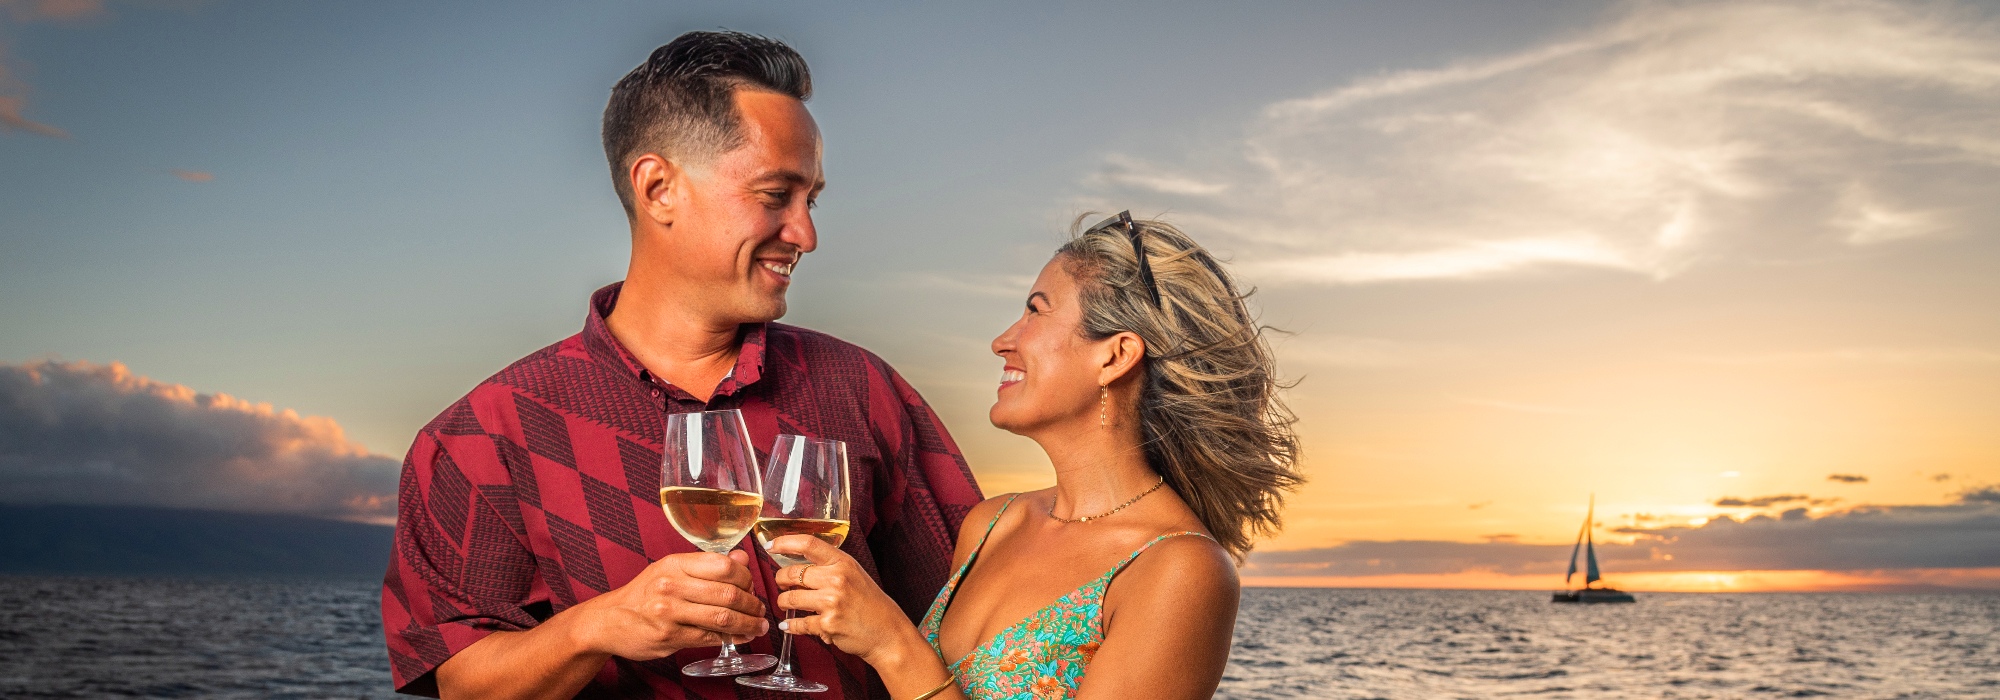 Couple doing a wine toast during sunset